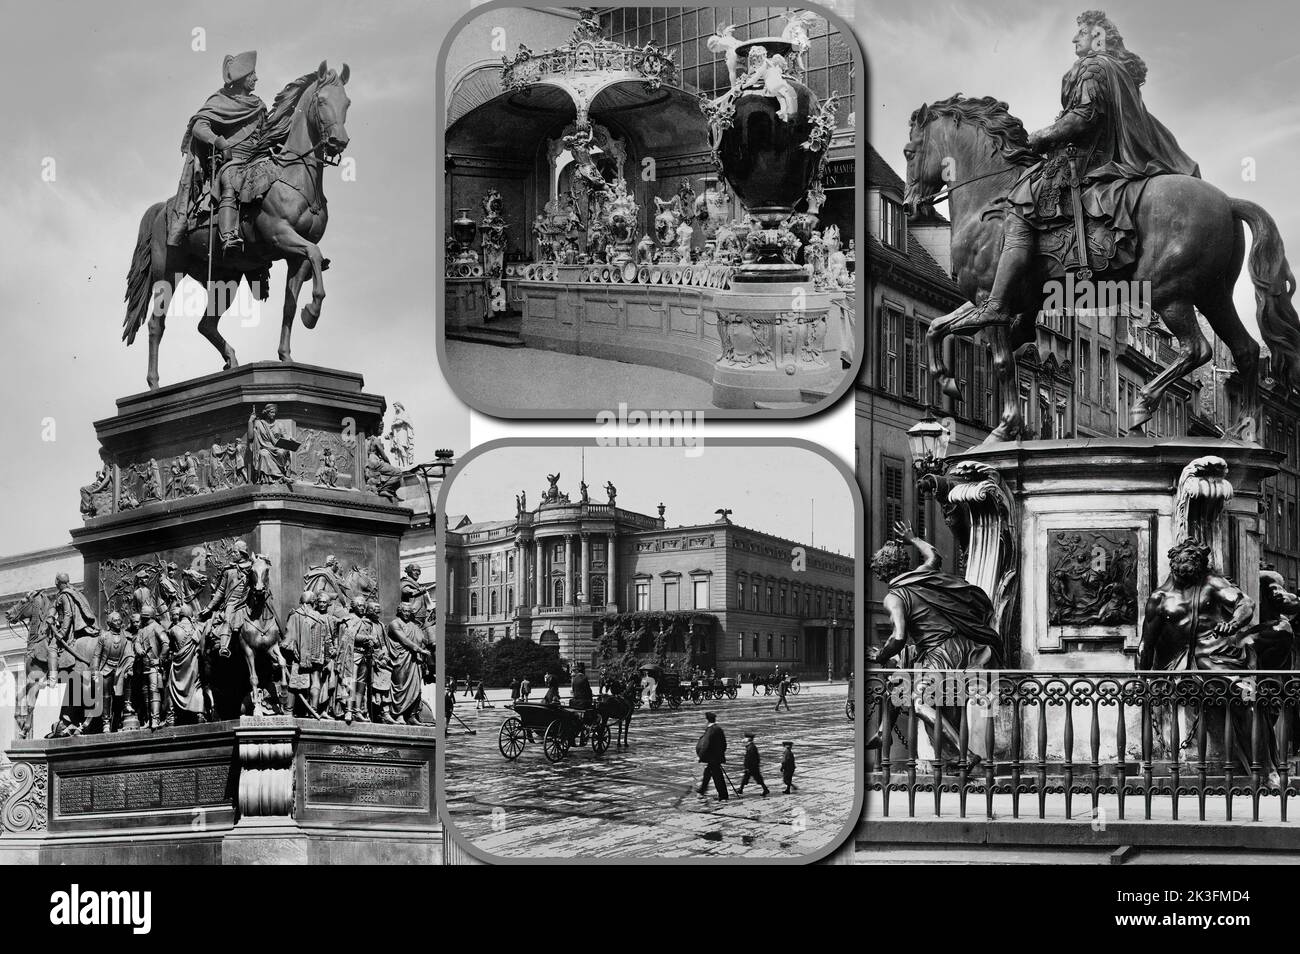 Berlin Ende 1800s und Anfang 1900s Stockfoto